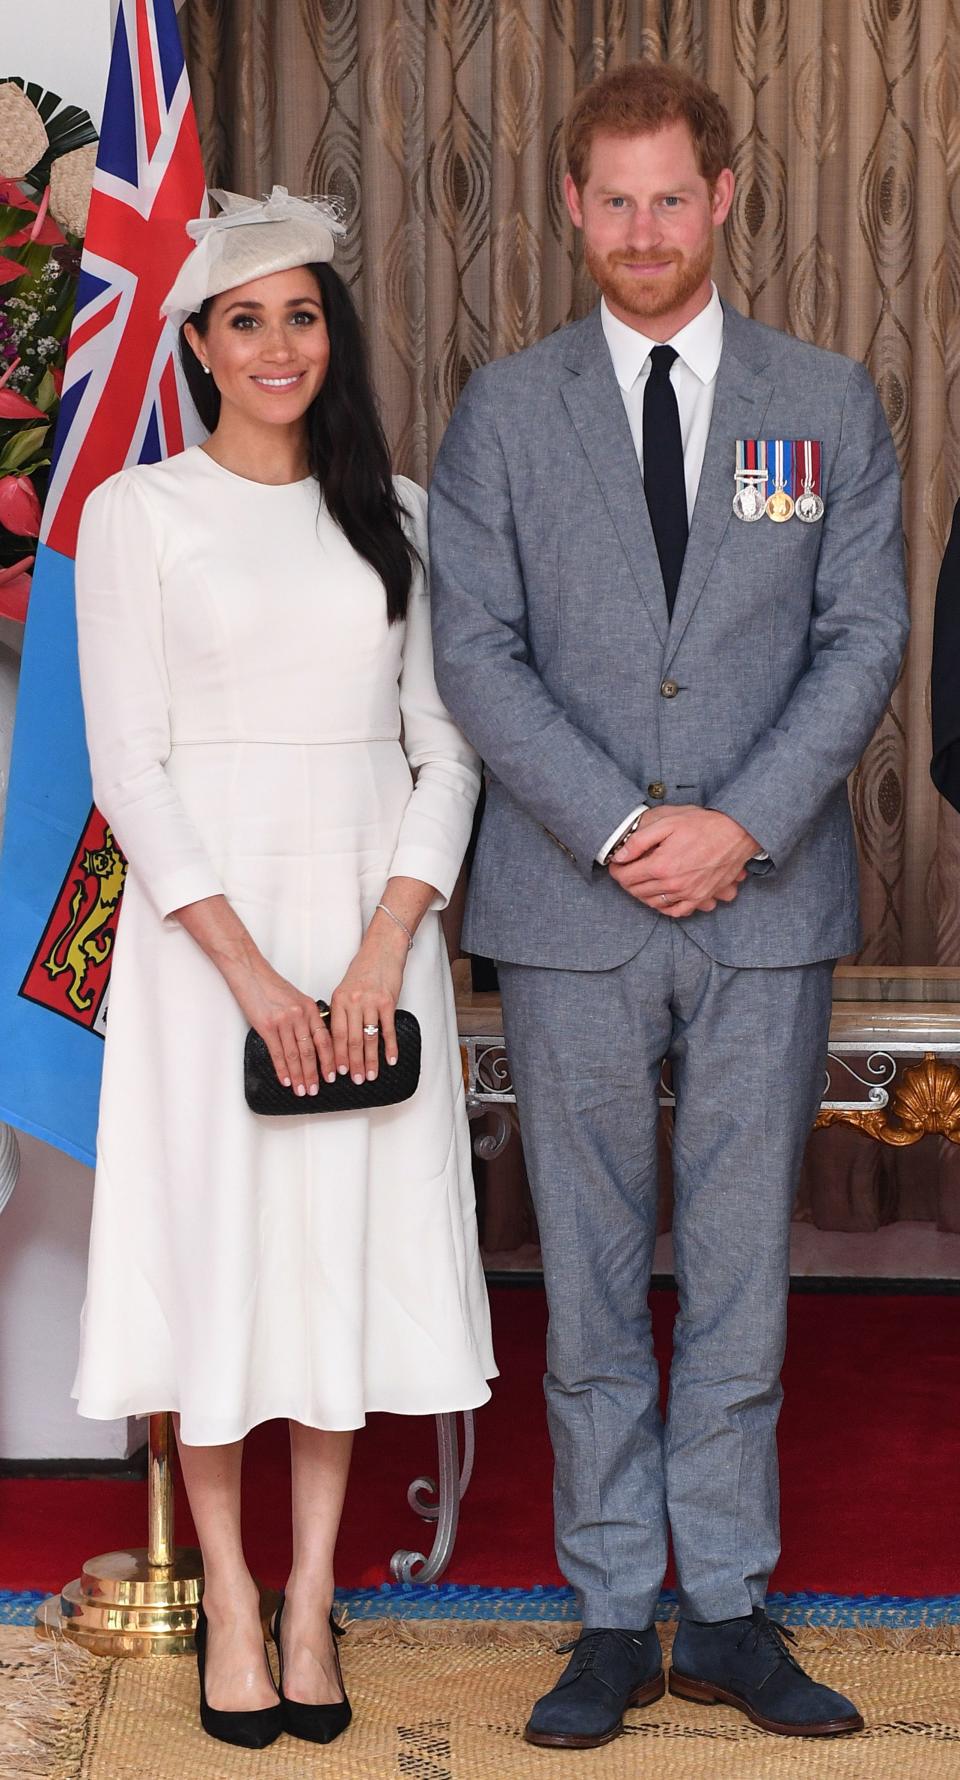 Prince Harry and Meghan Markle pose for a picture